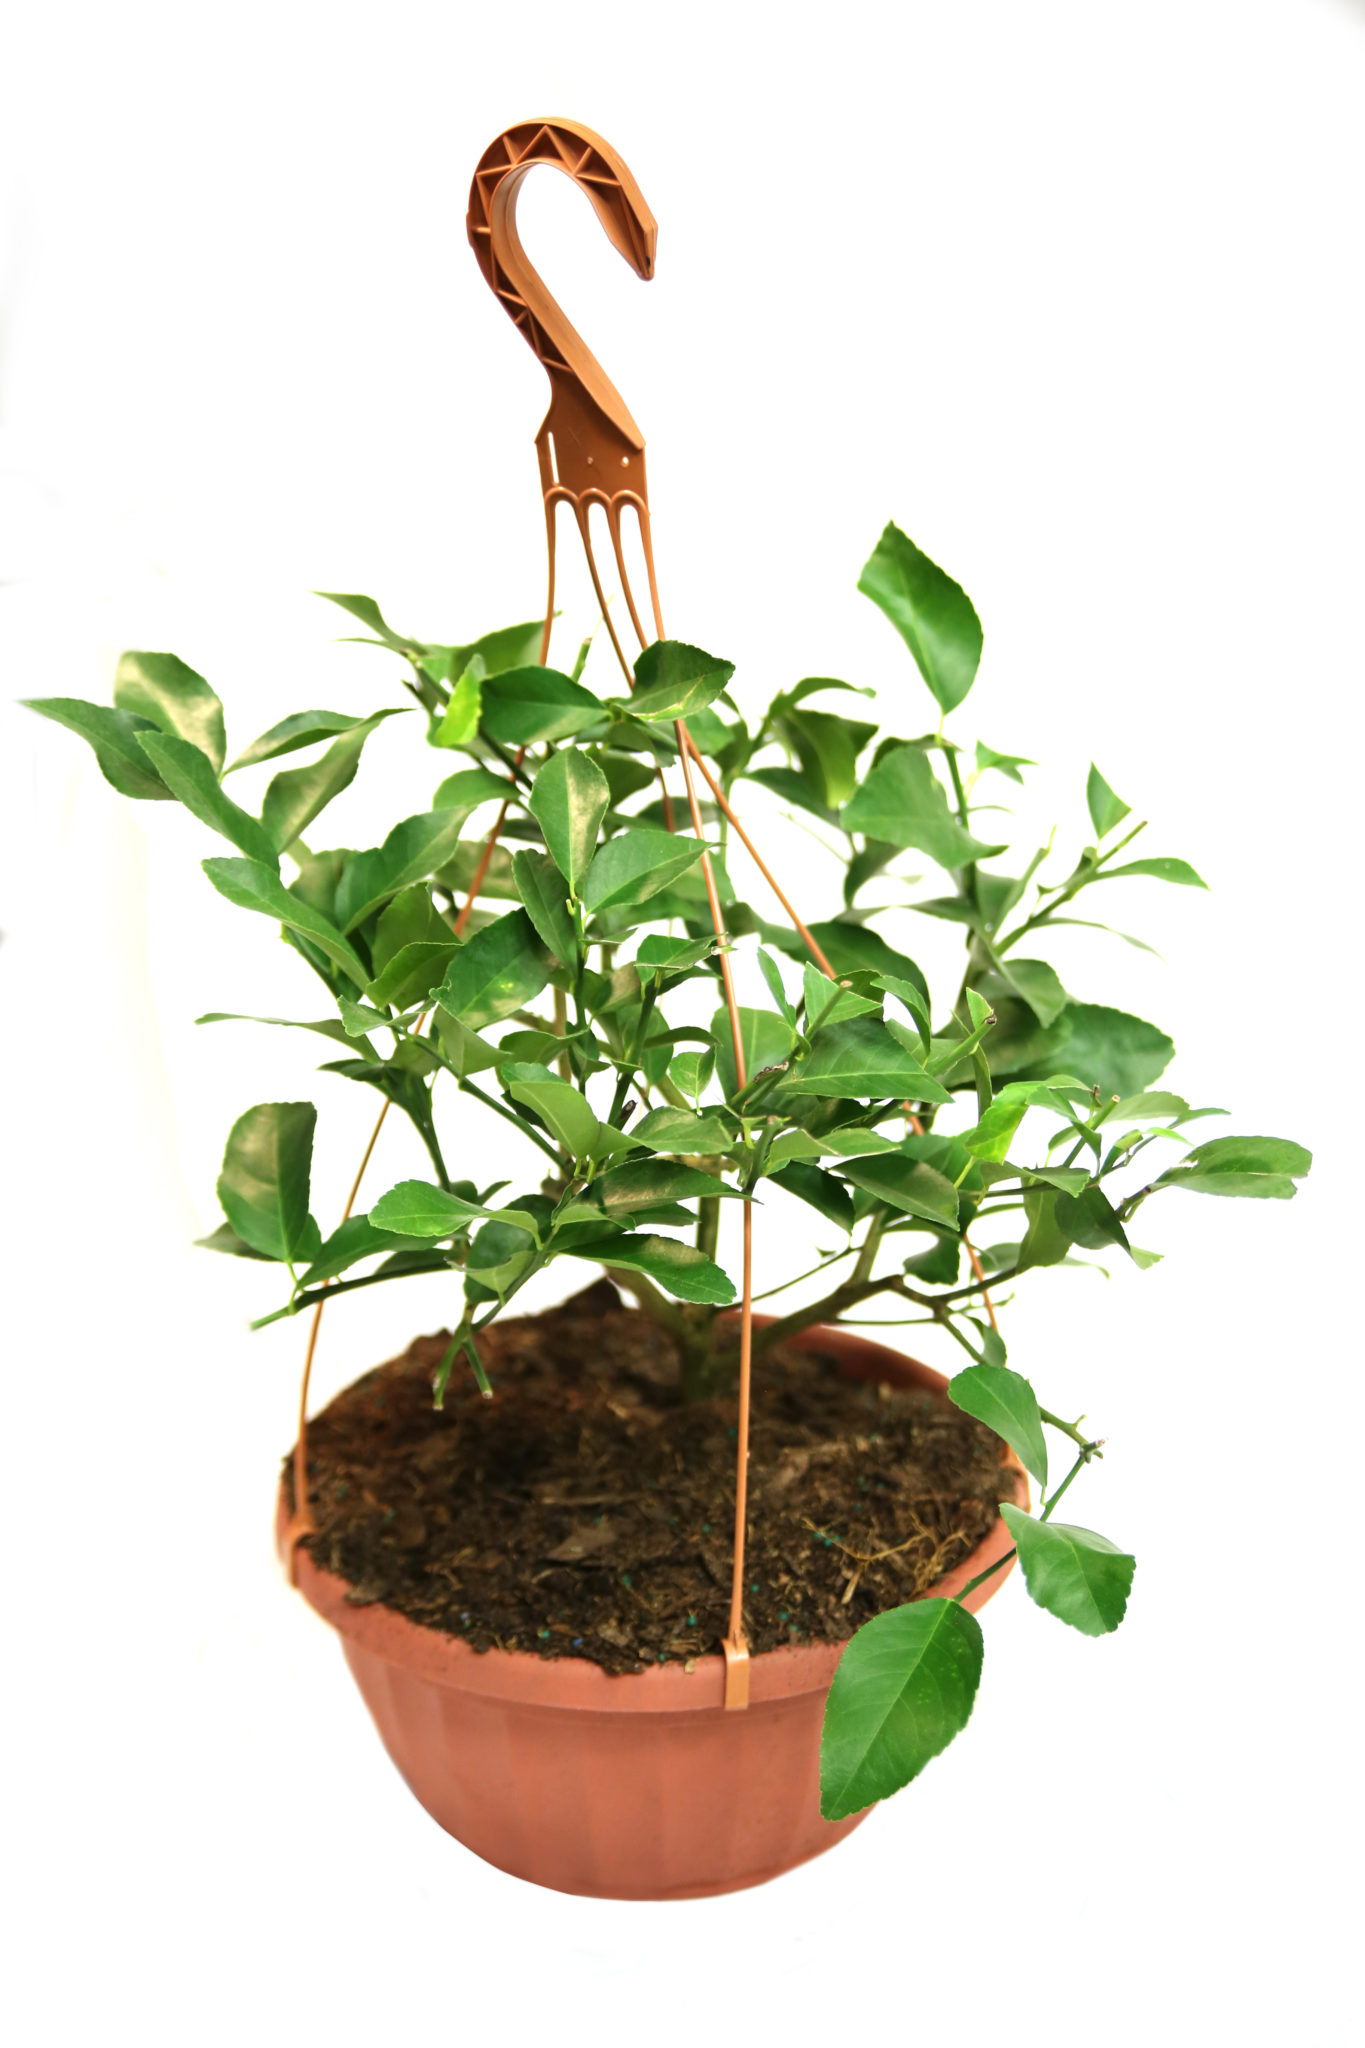 Image of Dwarf Key Limequat Hanging Basket (Age: 1 Year Height: 18 - 26 IN Size: 3 Gallon)